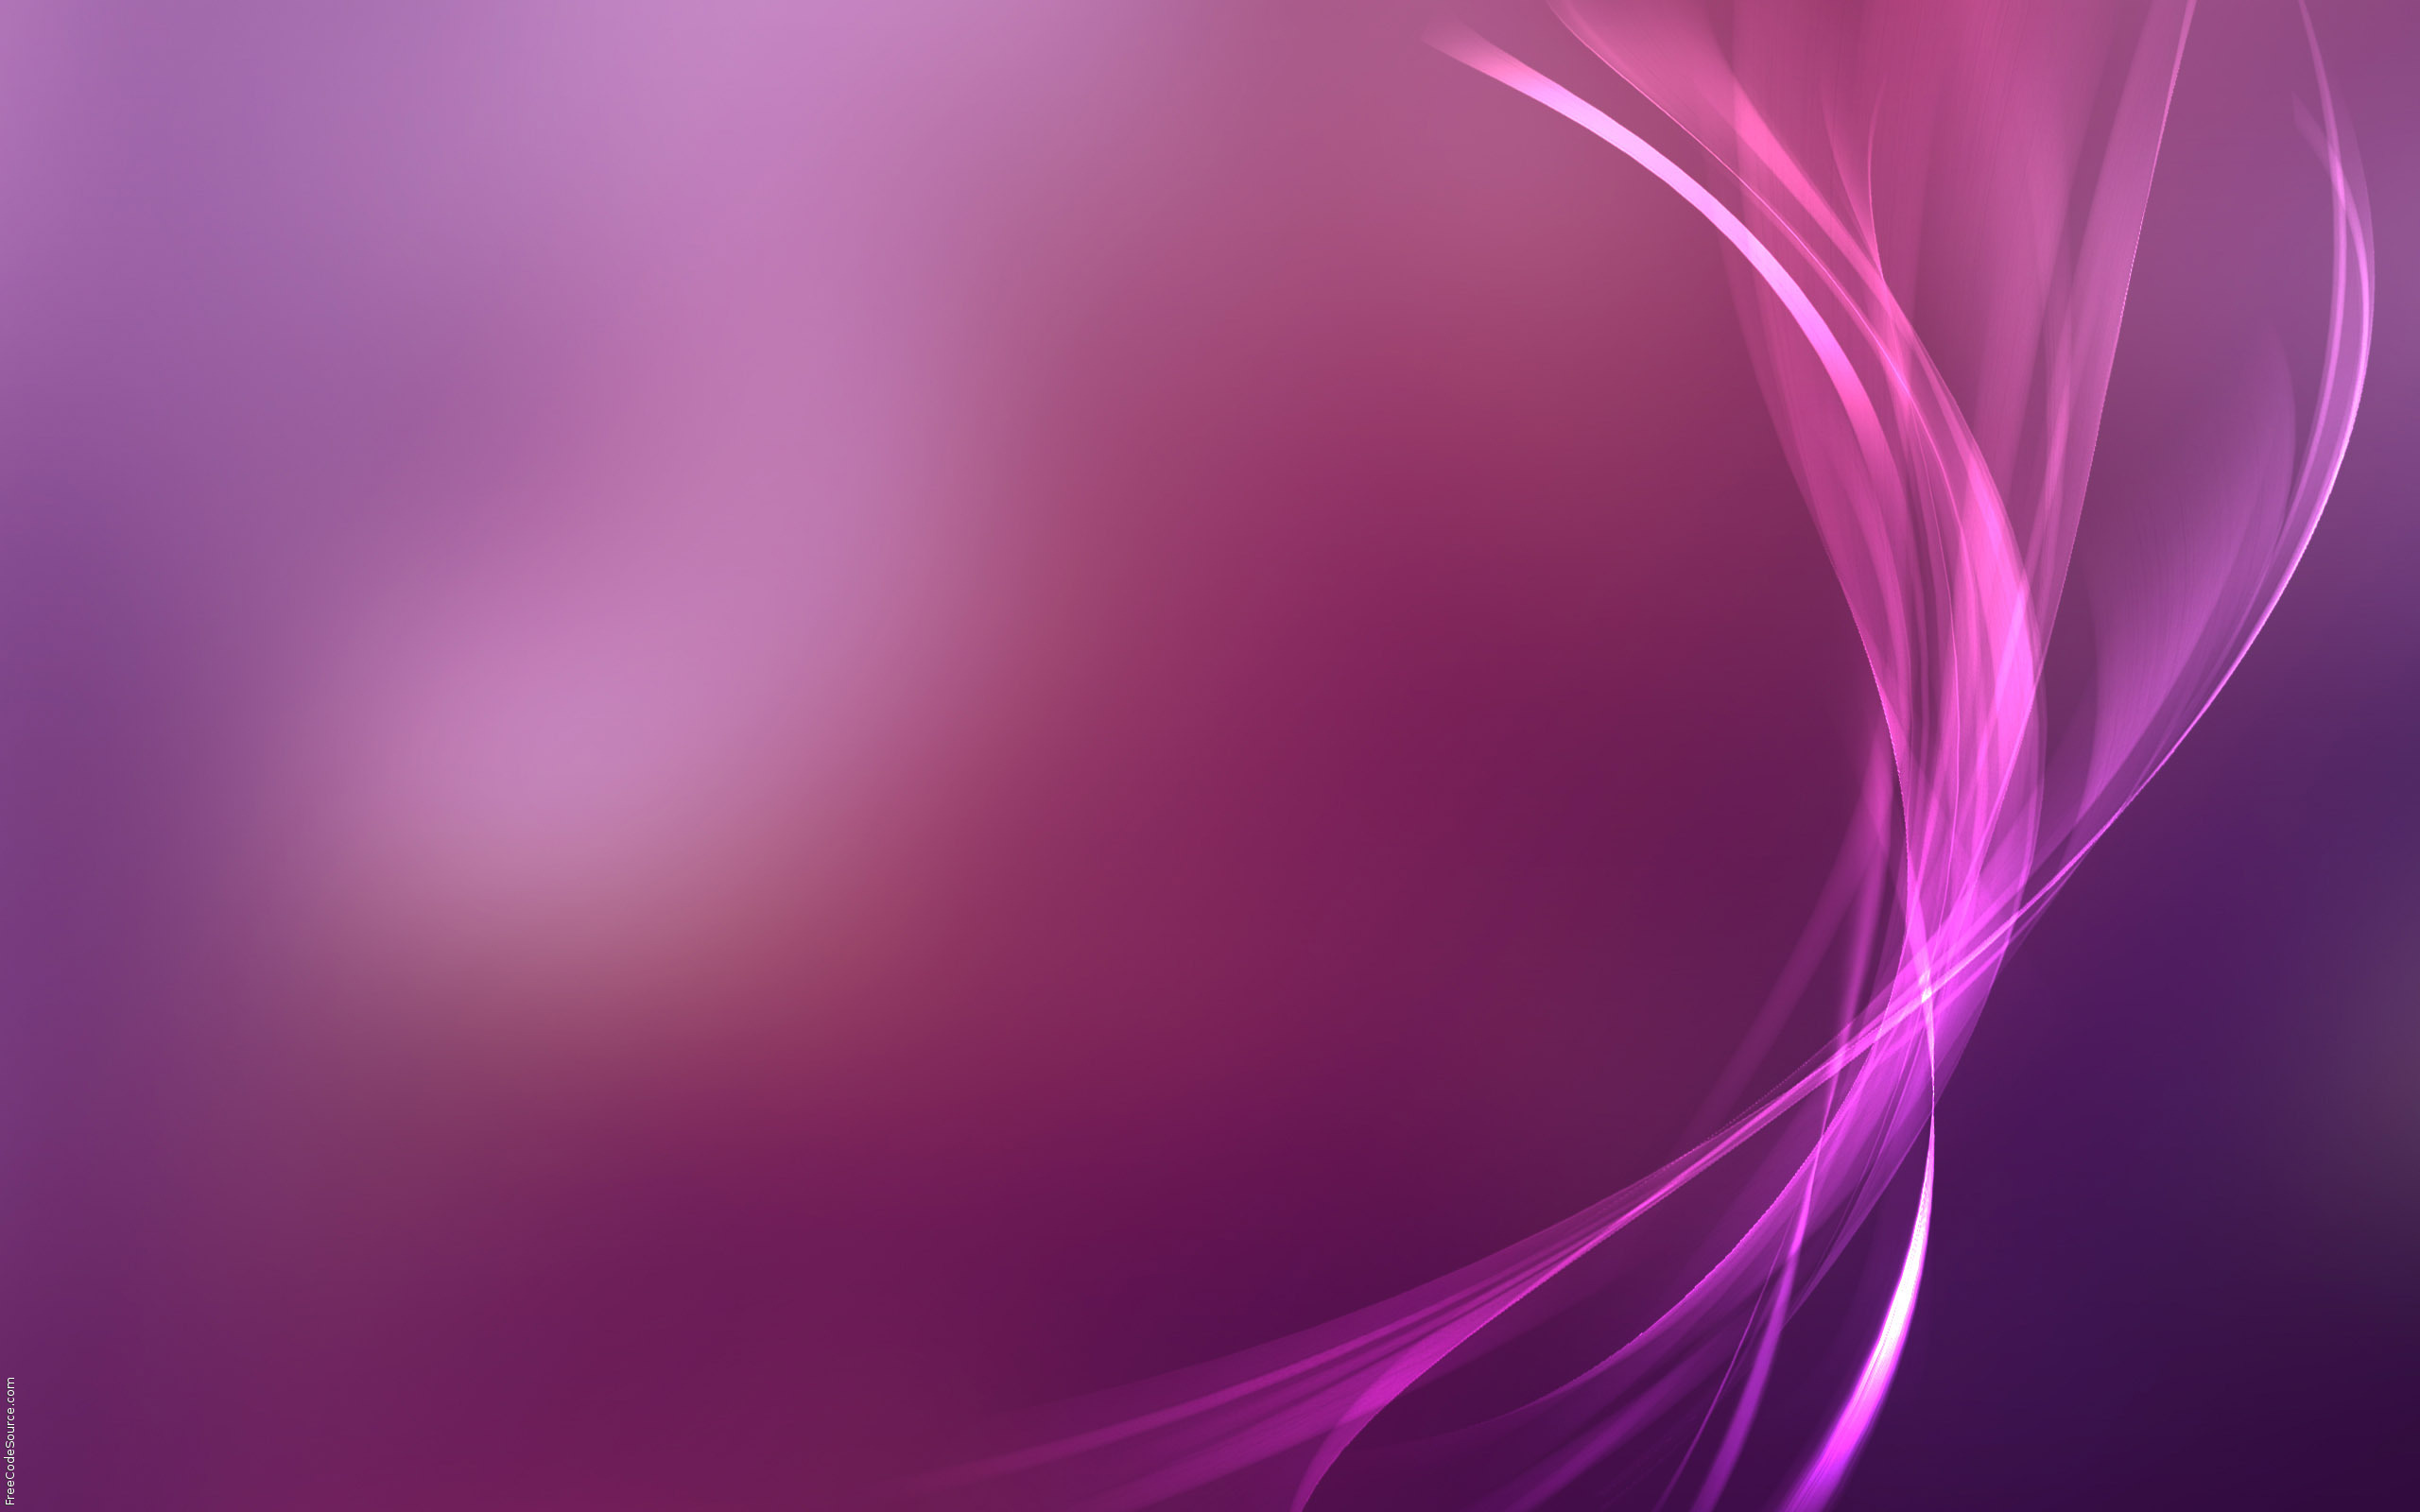 PURPLE RIBBON ALL STARS WALLPAPERS FREE Wallpapers Background images 2560x1600